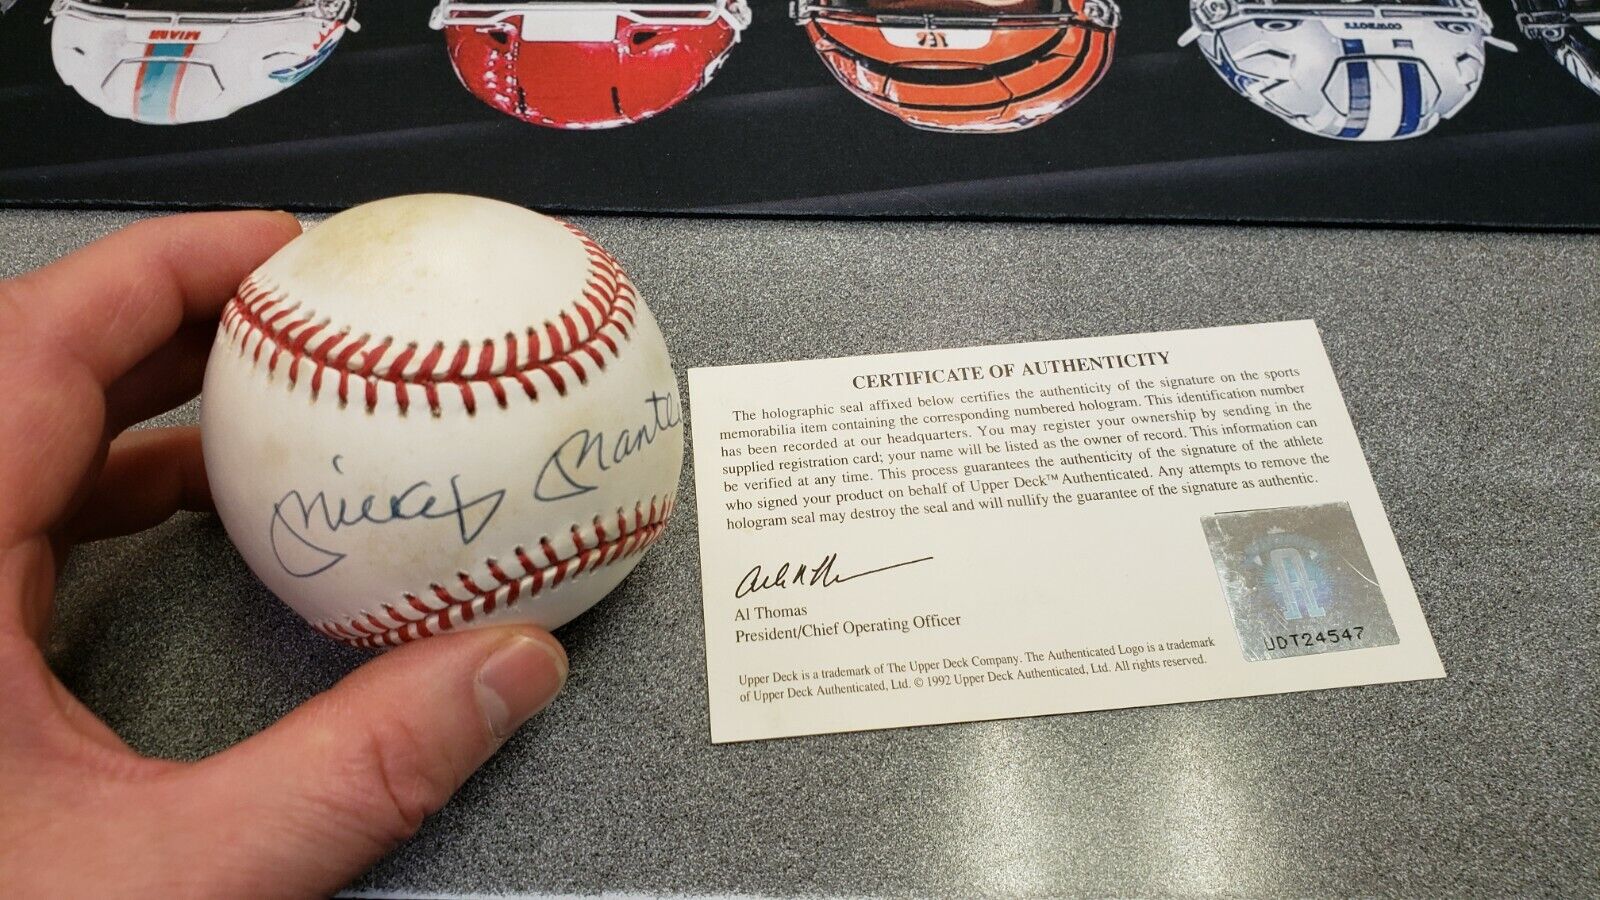 *500 HR CLUB COLLECTION Break* AUTOGRAPHED Baseball MICKEY MANTLE